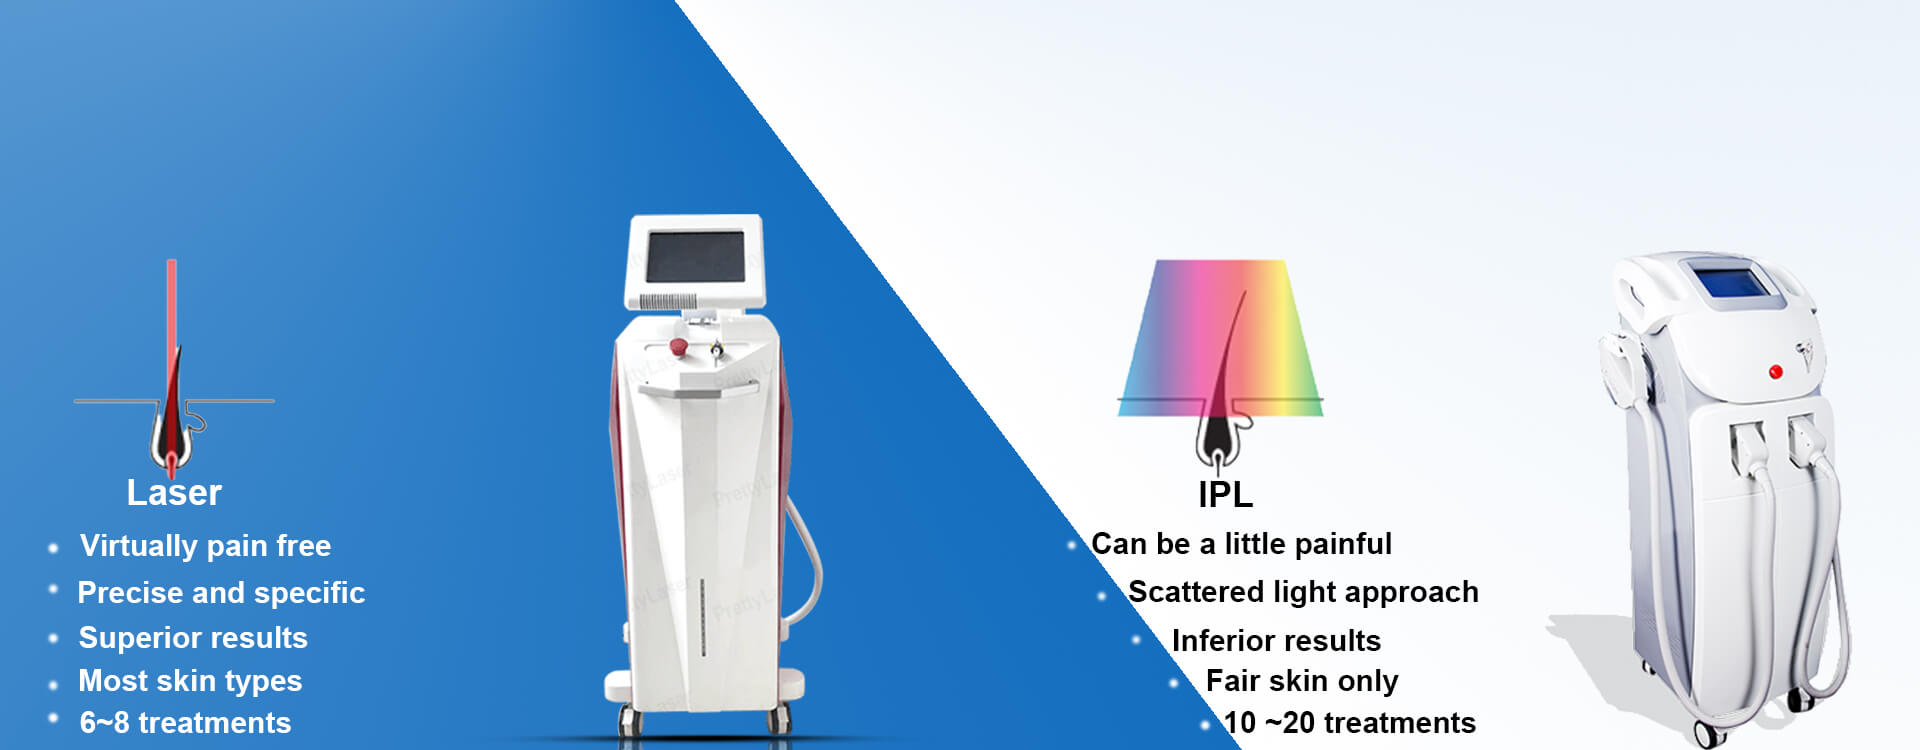 IPL VS Laser Hair Removal Treatment - Hair Removal | PrettyLasers